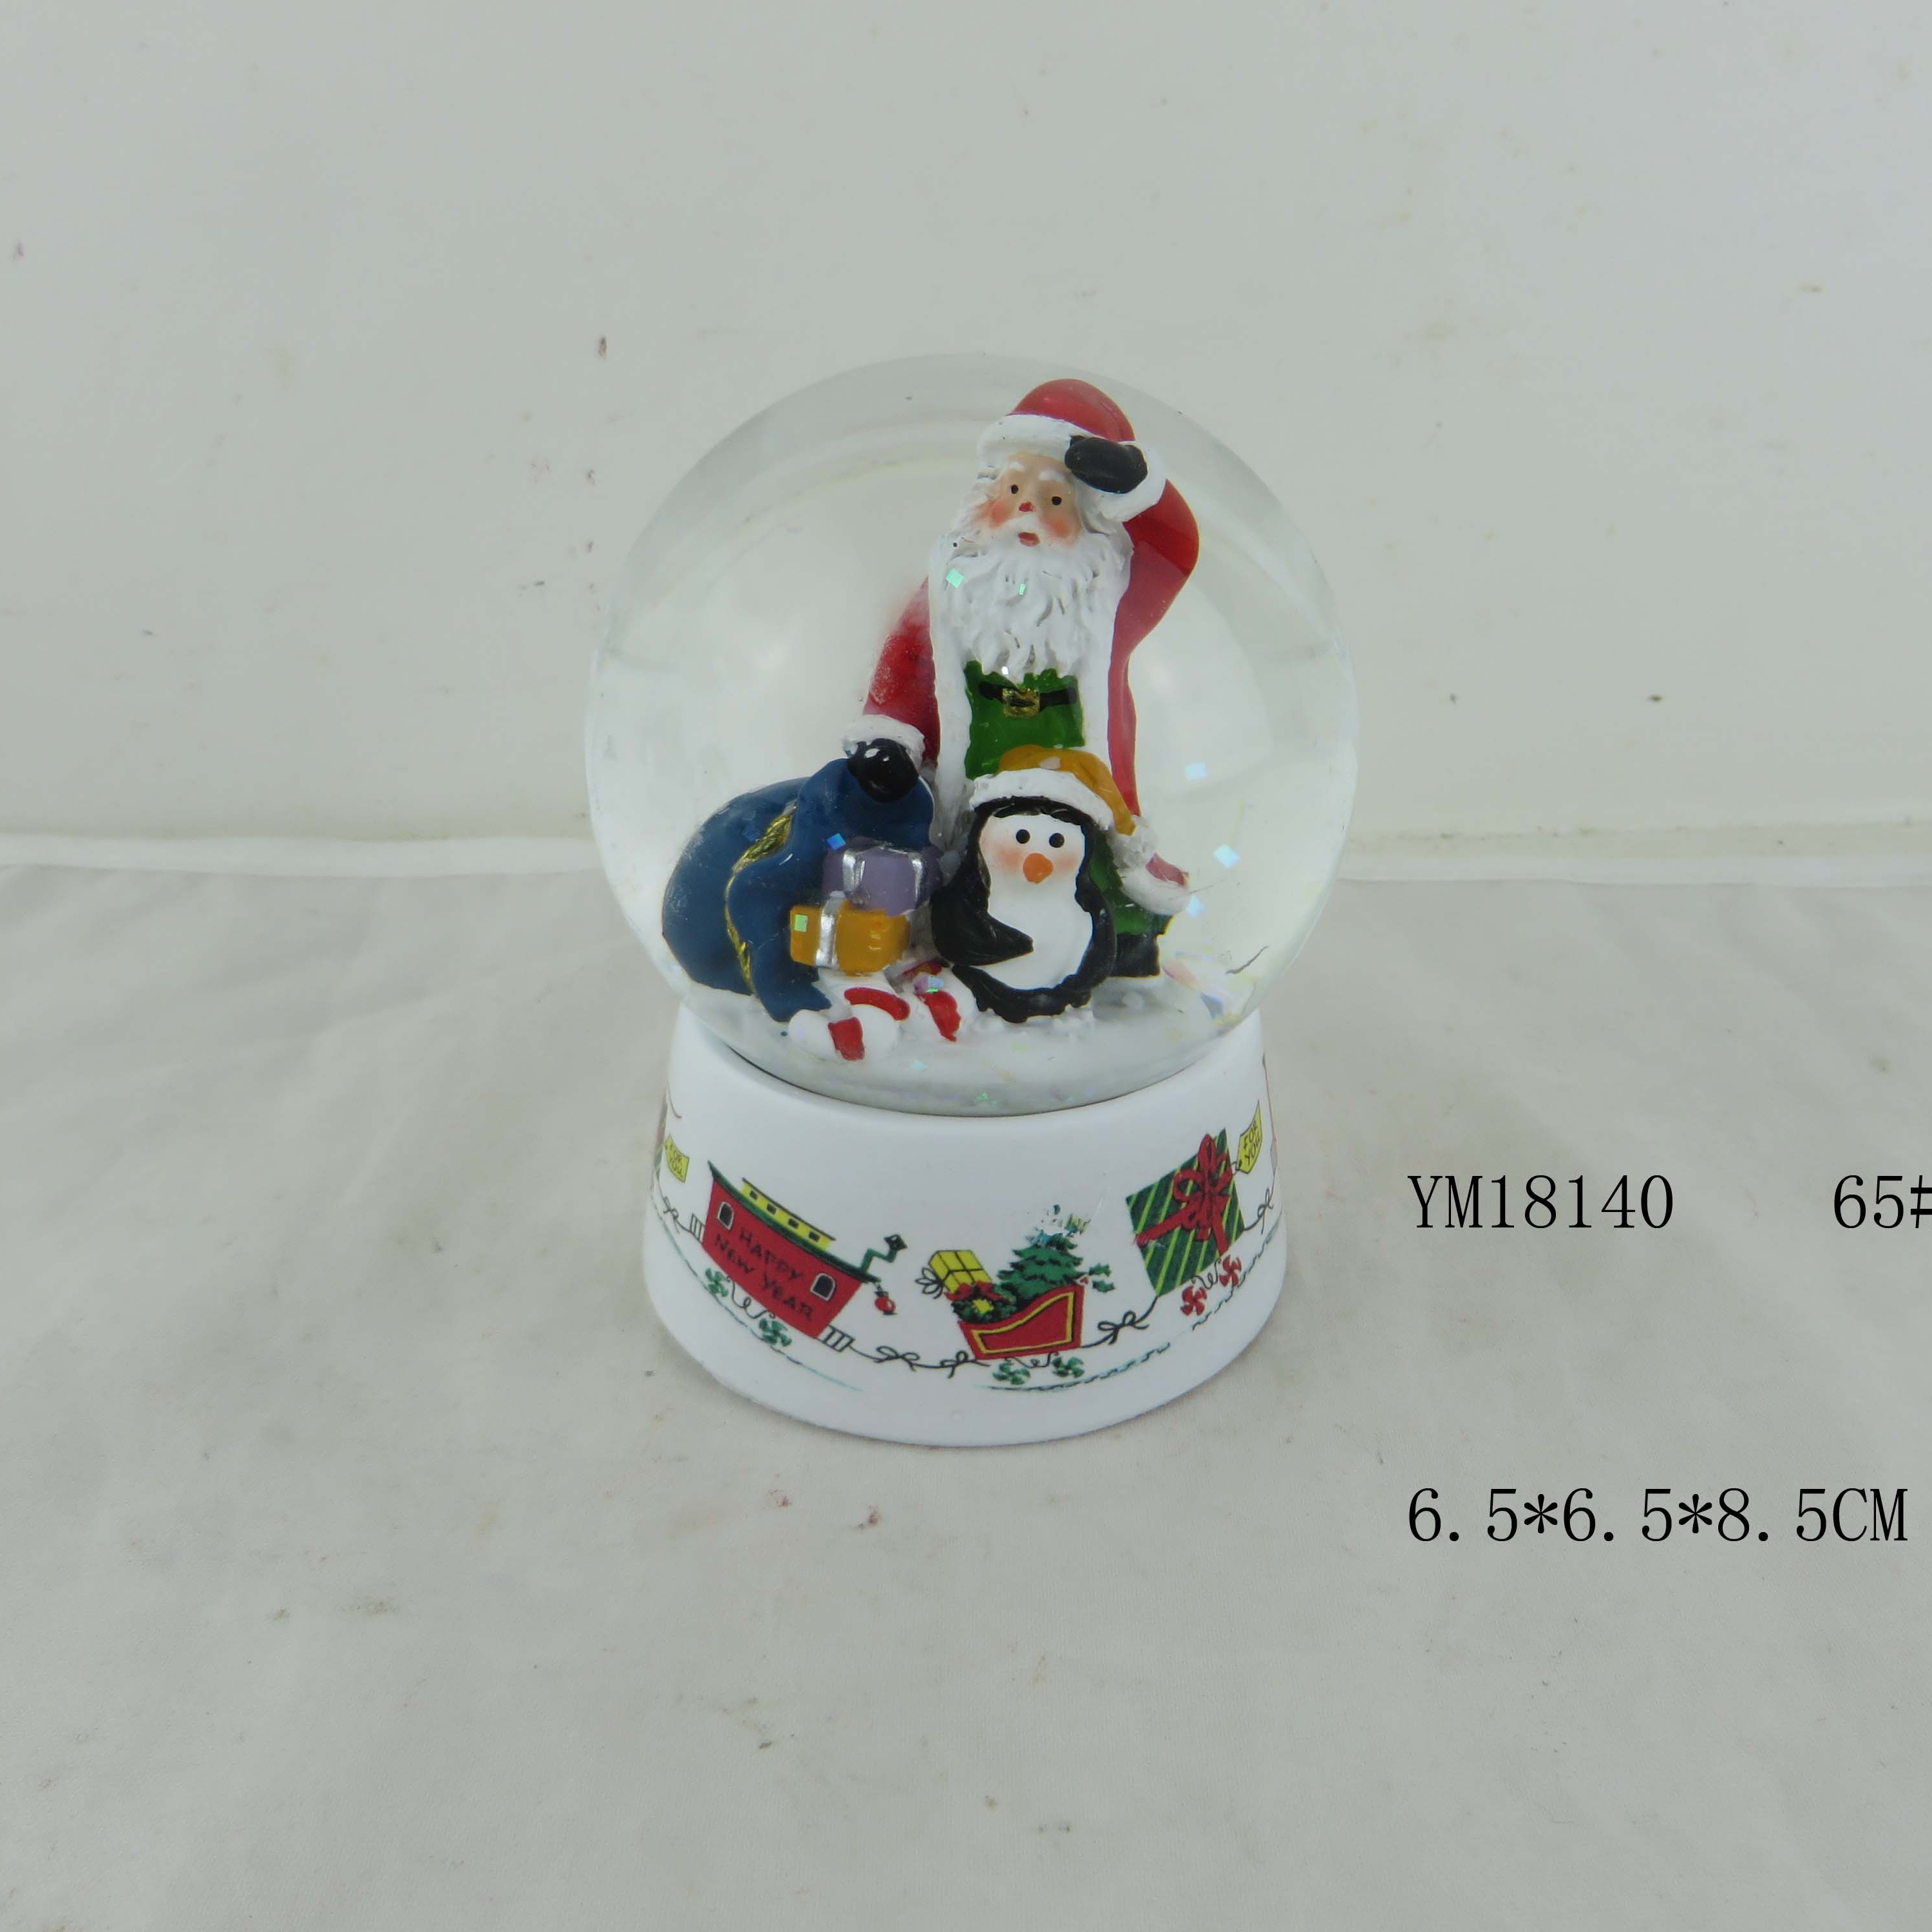 The new 2018 santa claus model water globe xmas decoration for home